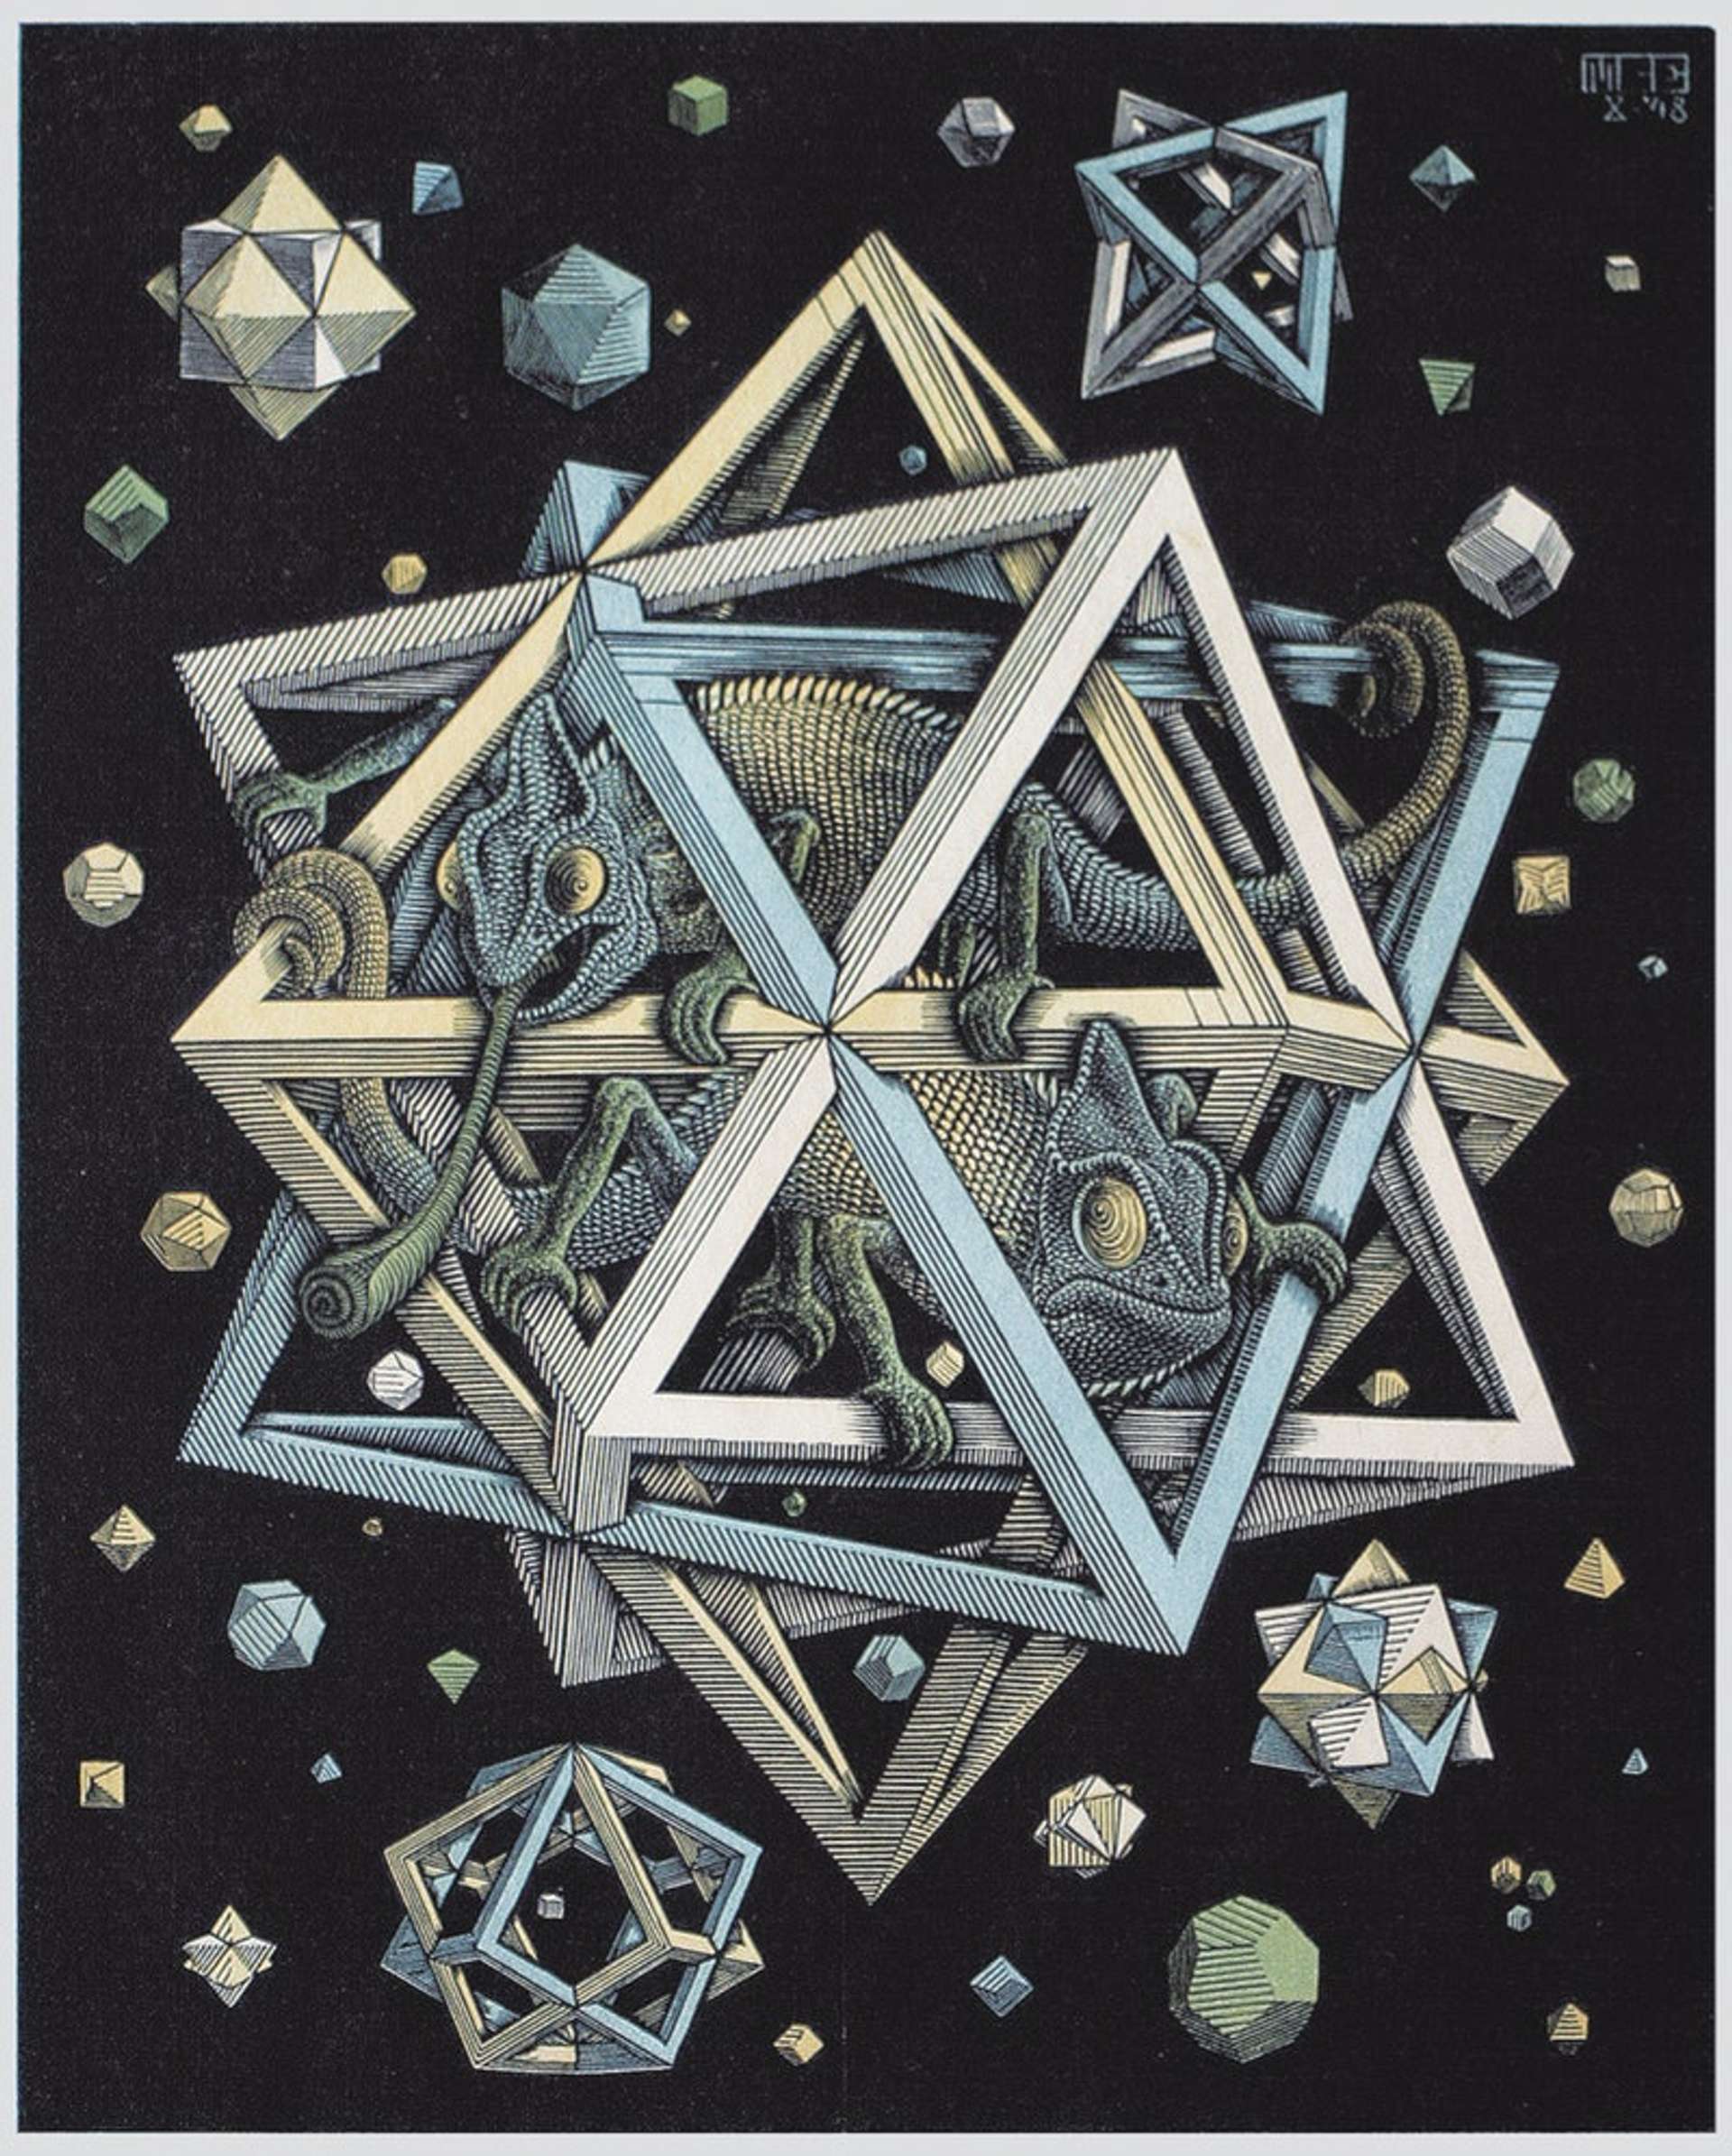 A black and white lithograph print titled "Stars" by M.C. Escher. The artwork features a repeating pattern of interlocking stars forming a geometric design, with two chameleons inside.